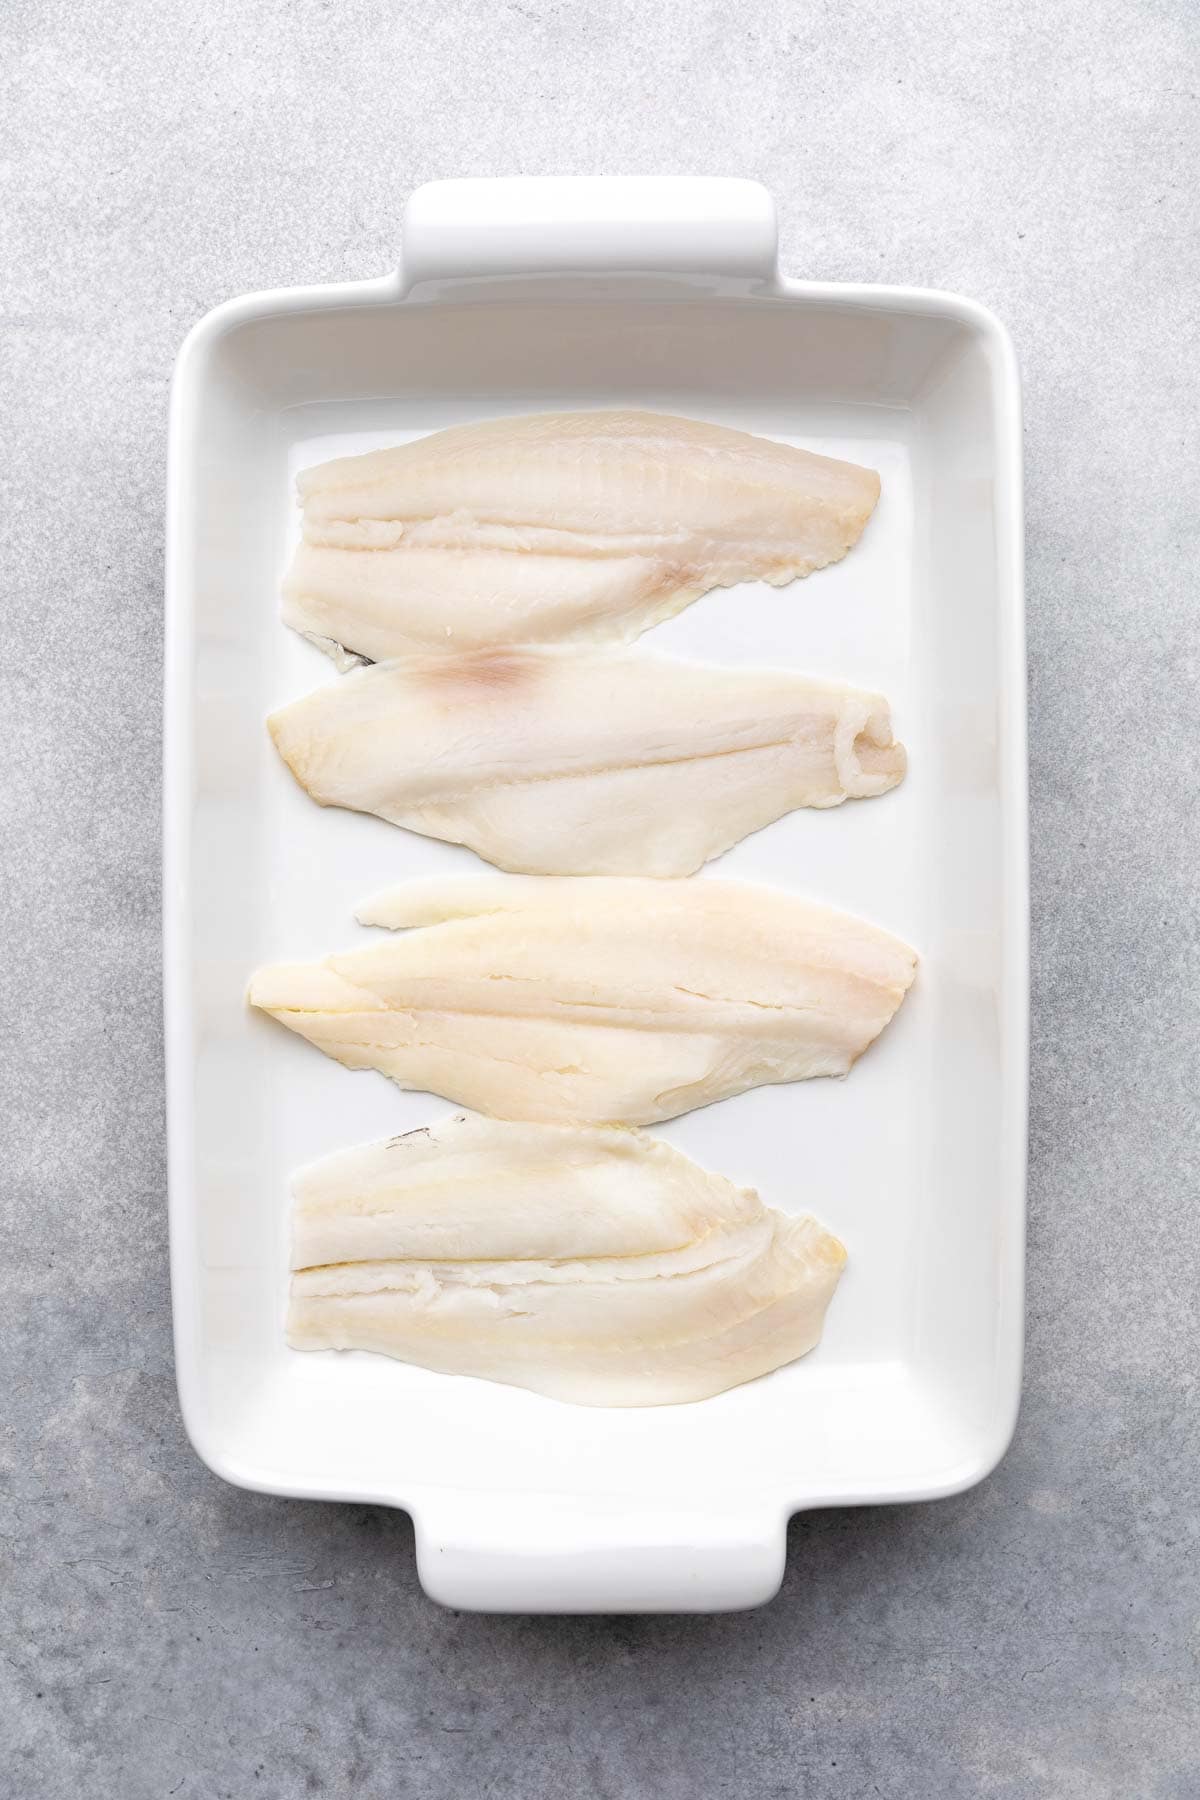 Fish fillets in a white baking dish.